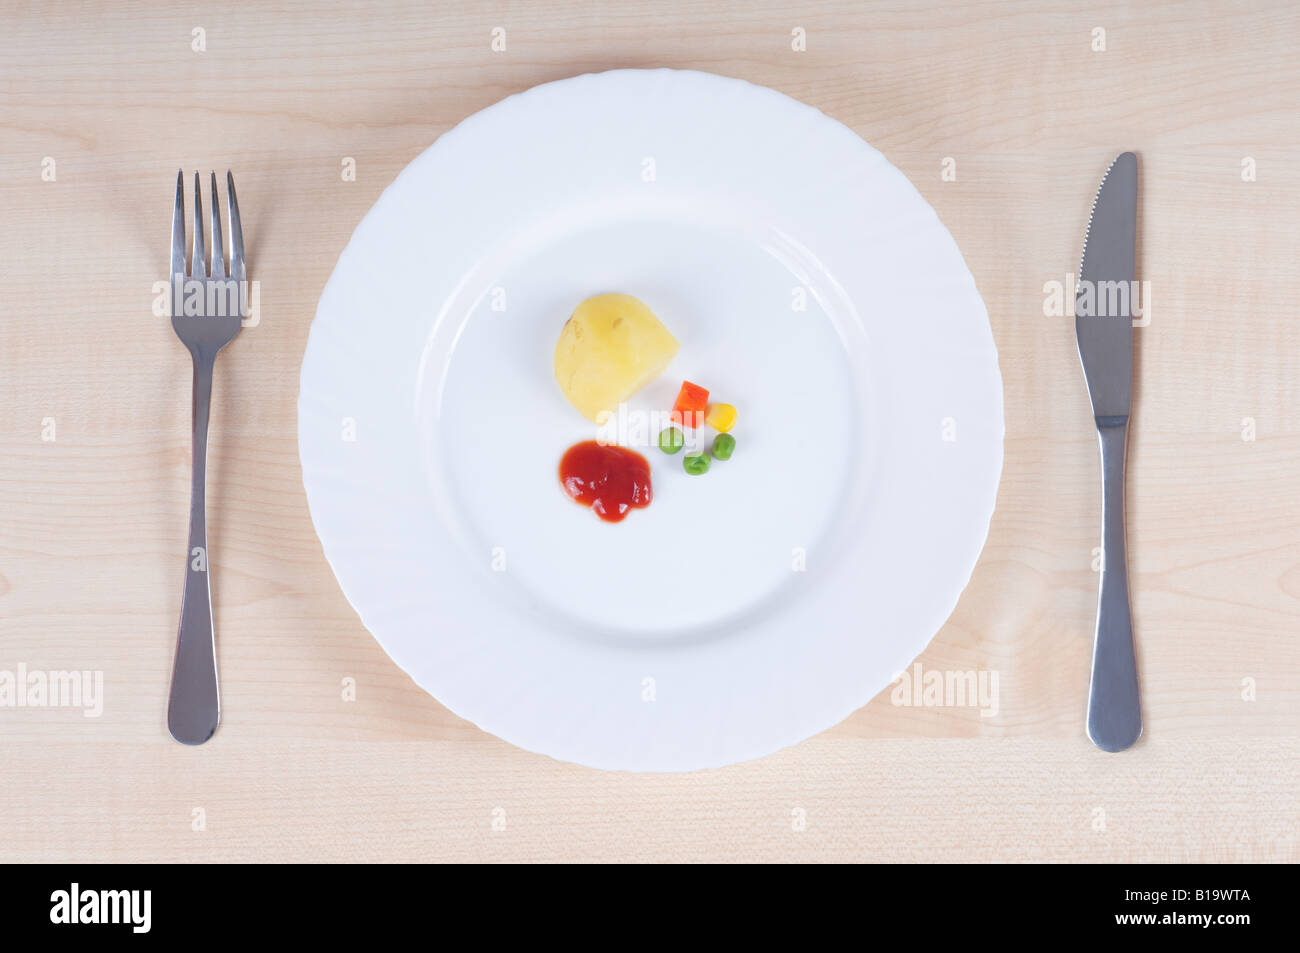 On diet: sober lunch with single potato, boiled carrot, peas, corn and tomato ketchup. Stock Photo